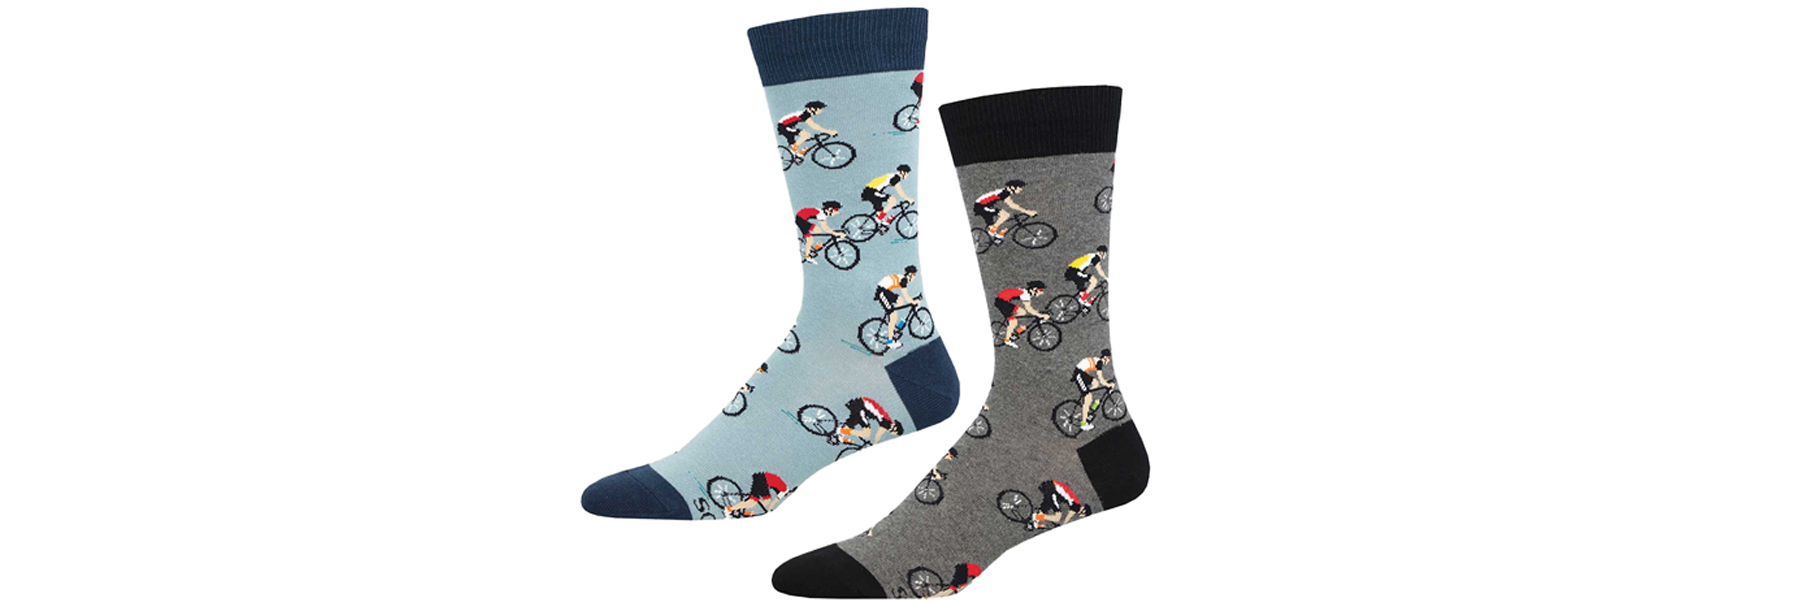 Bicycle Gifts, Clothing, Jewelry, Ornaments, Posters, Art at ...